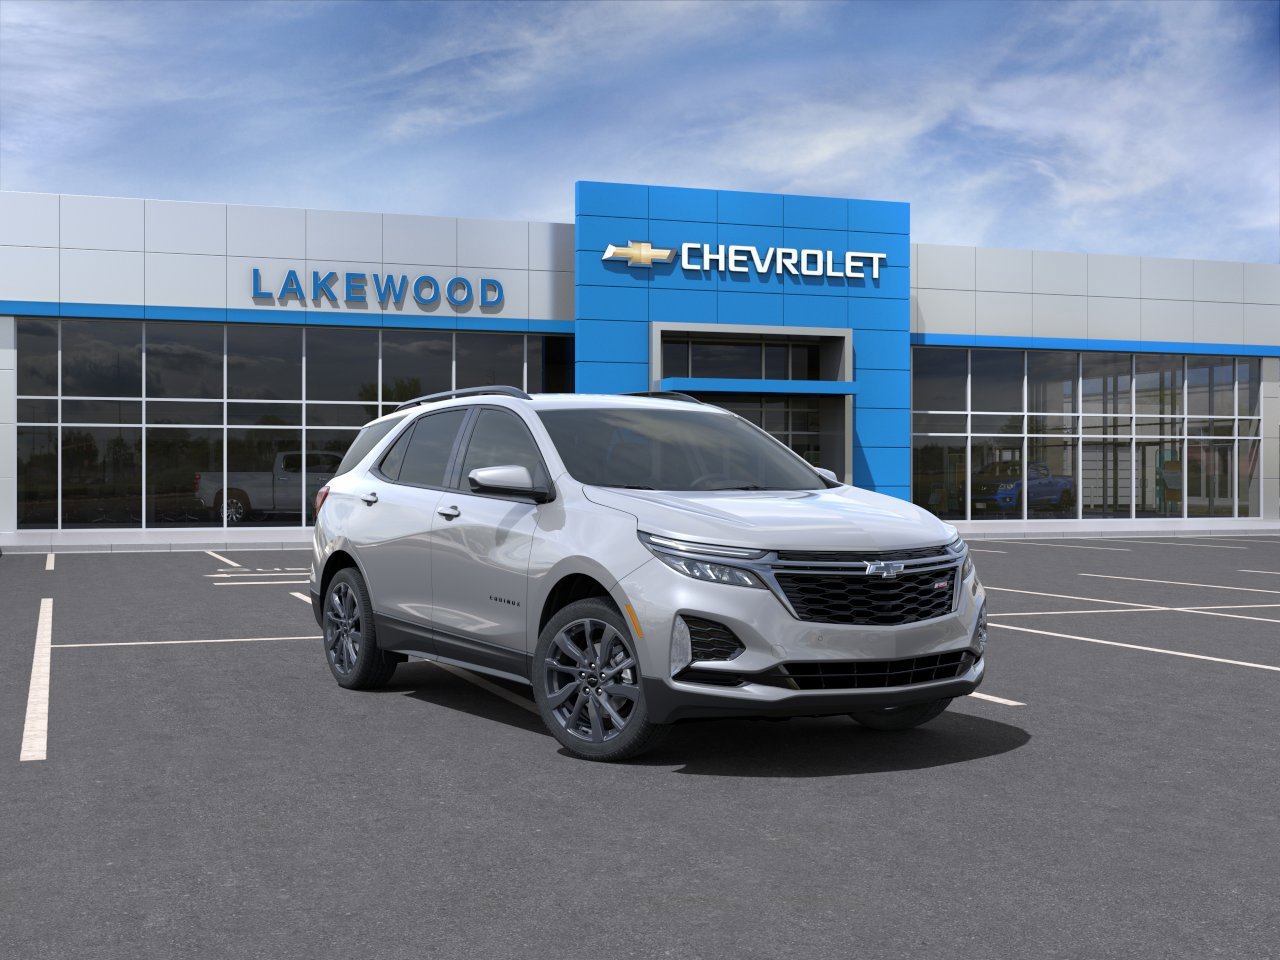 How To Change Voice Recognition Language To English On Chevy Equinox